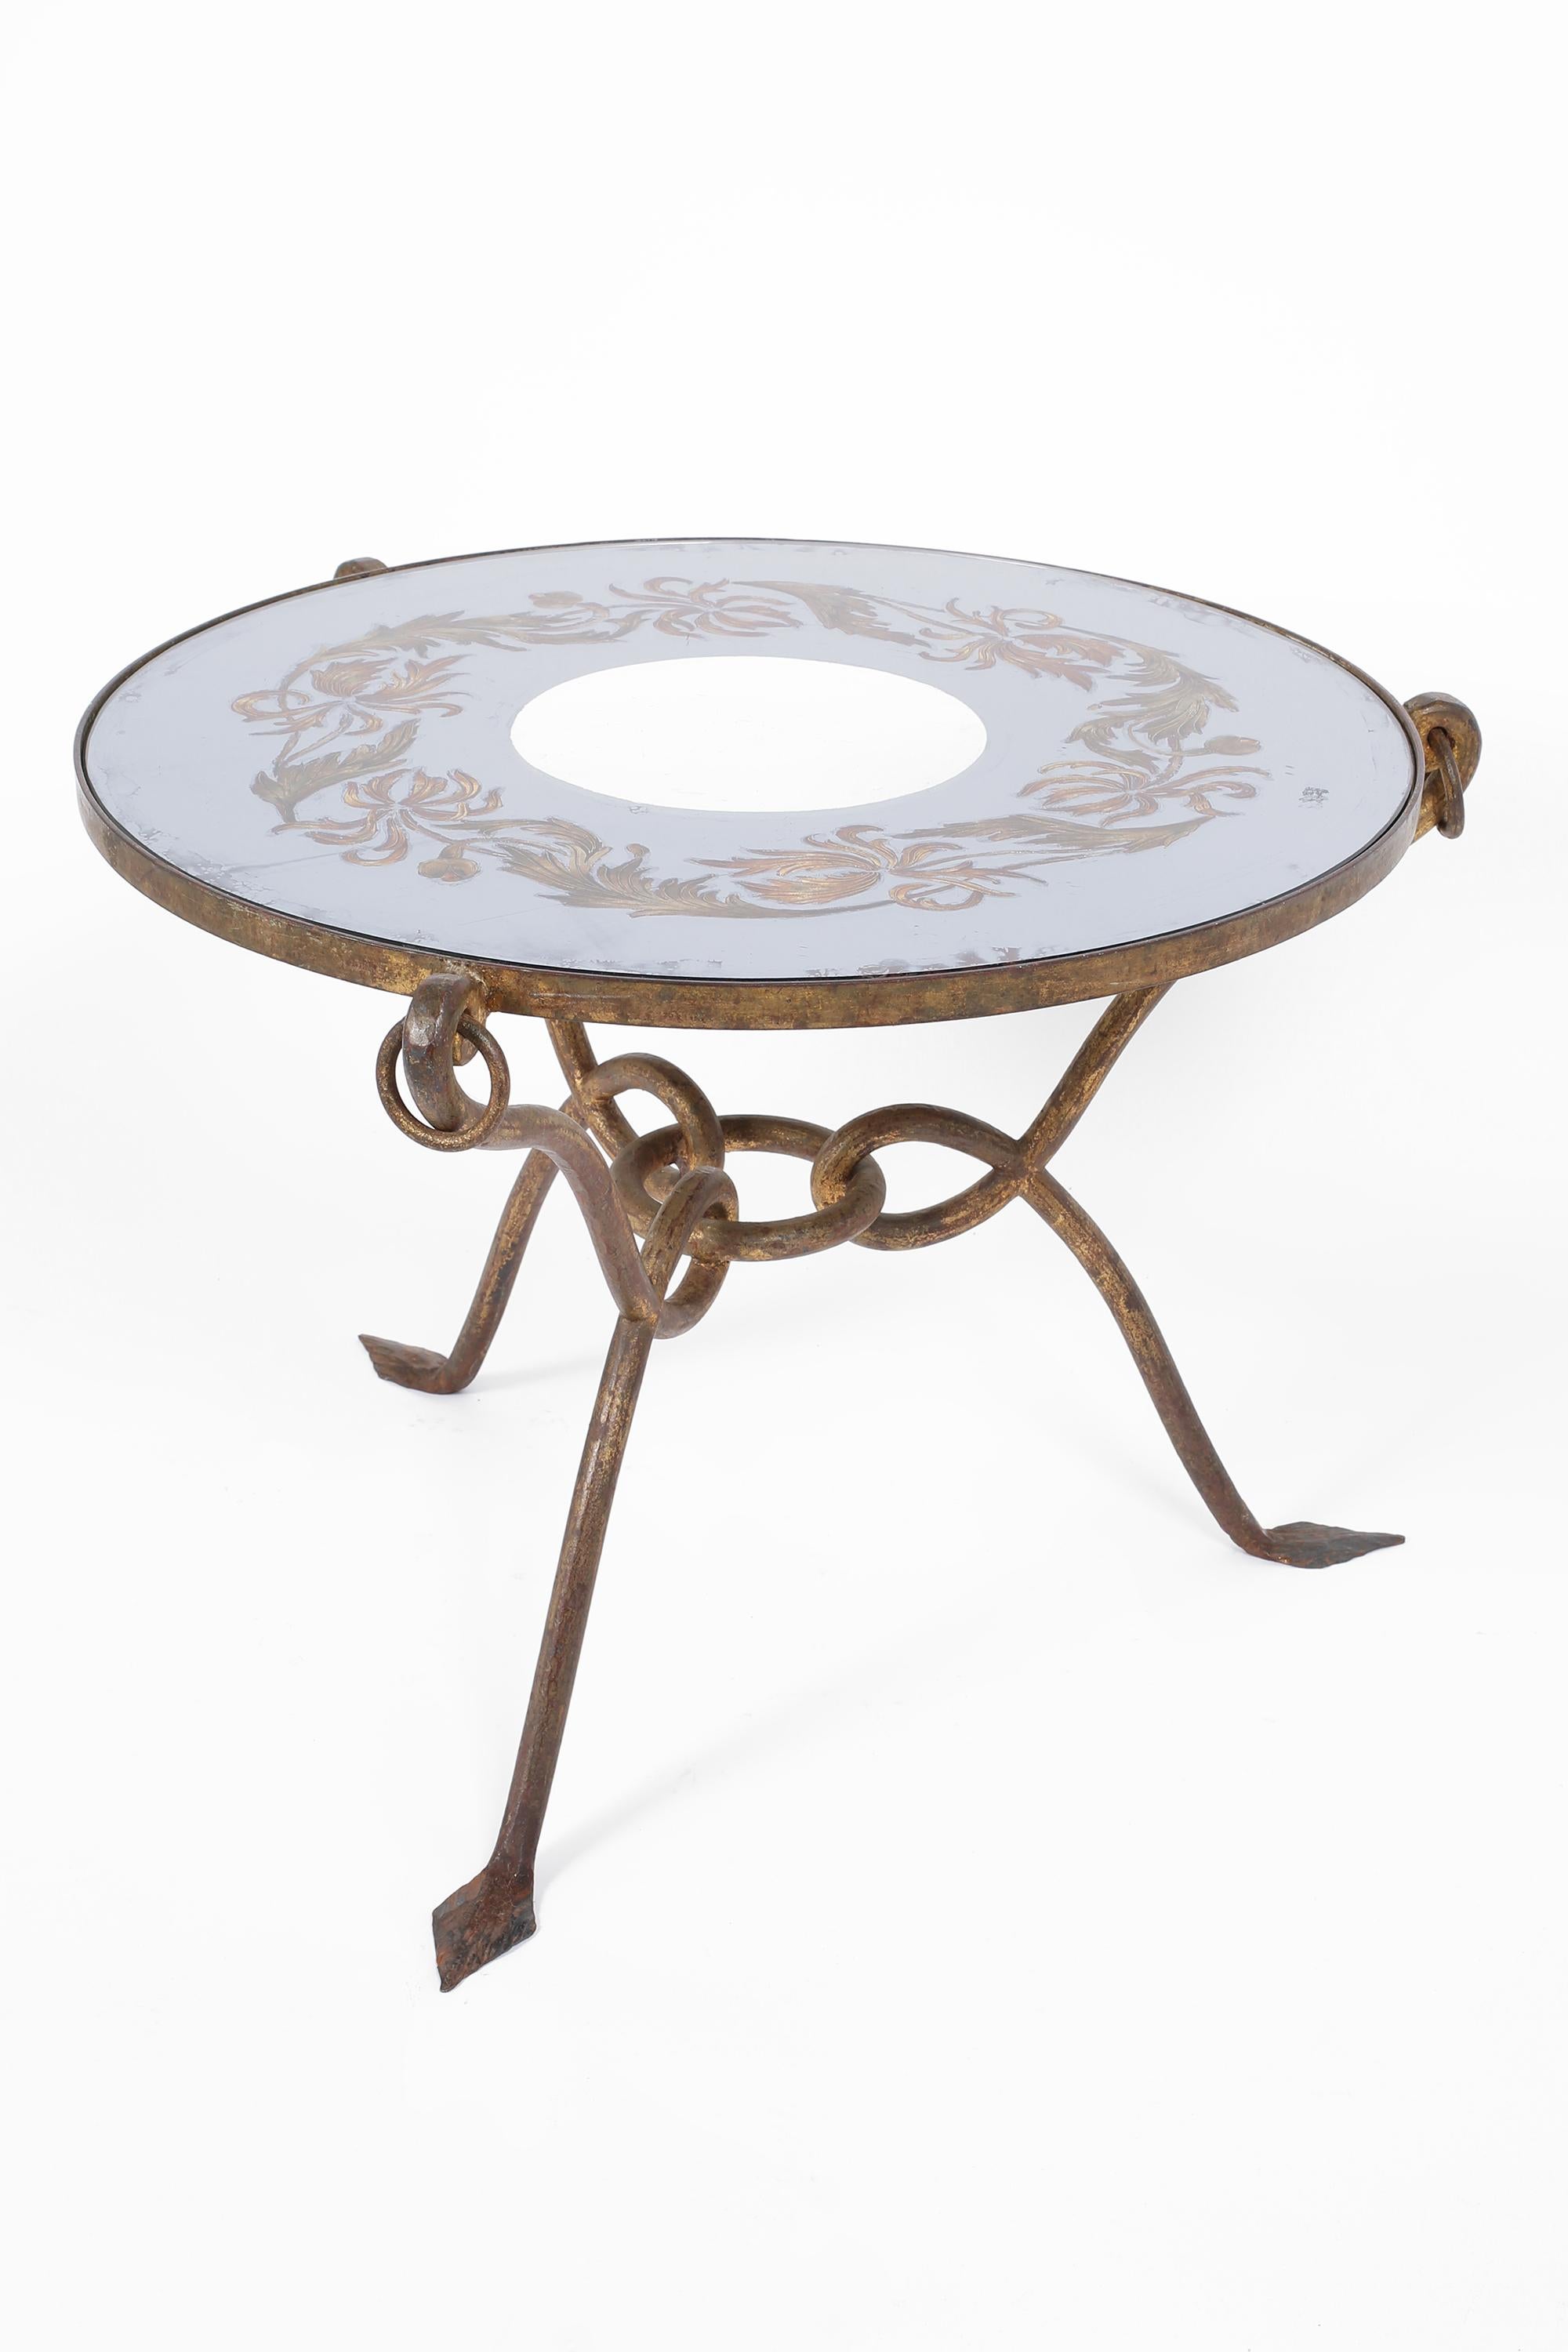 Art Deco Circular Gilt Iron Occasional Side Table by René Prou